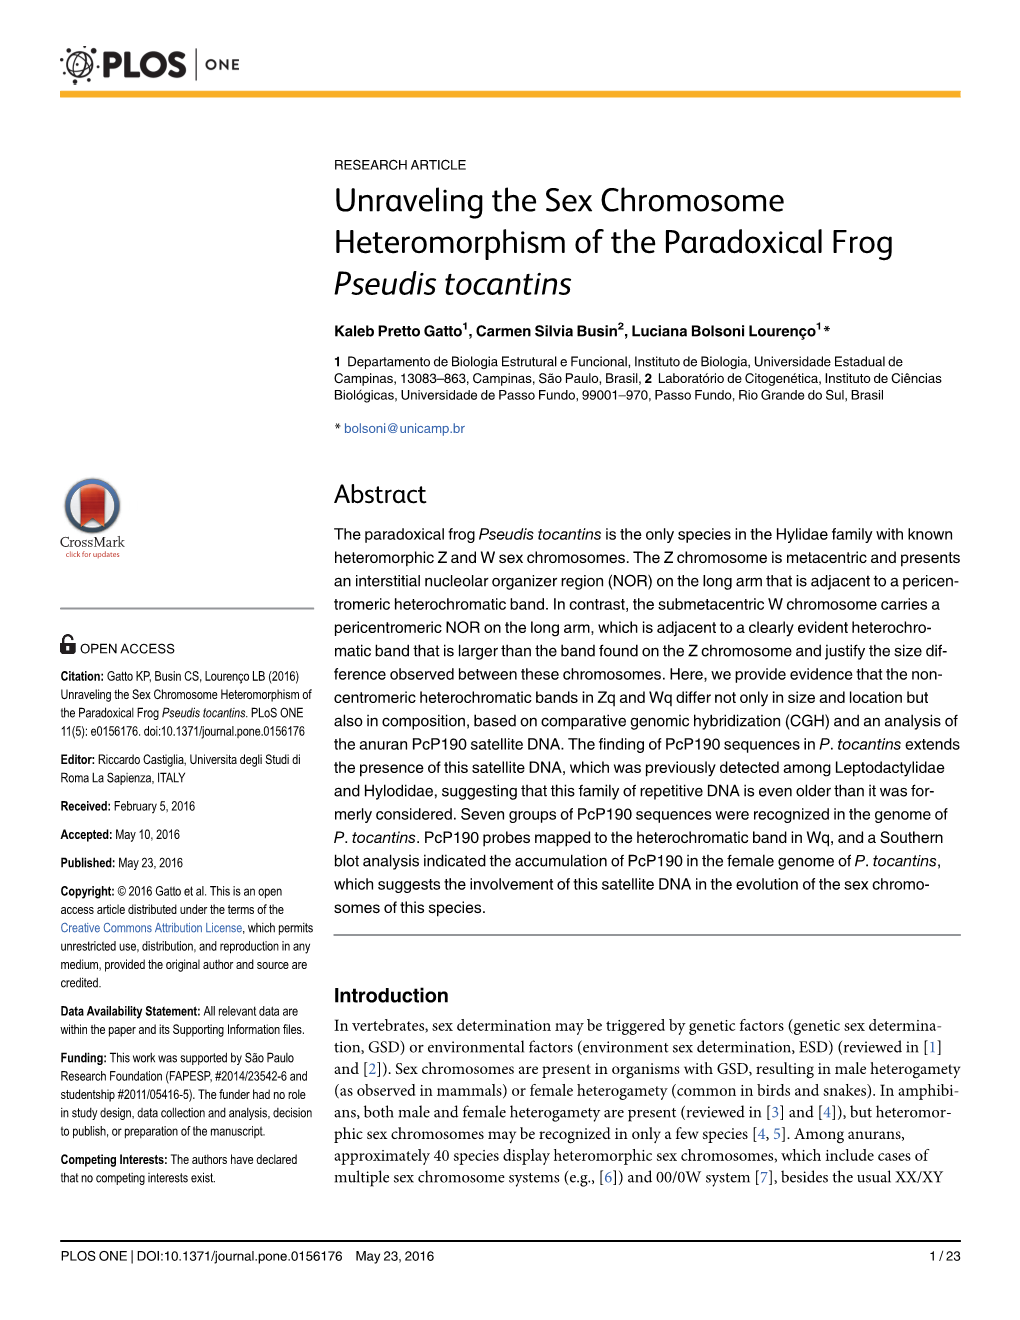 Unraveling the Sex Chromosome Heteromorphism of the Paradoxical Frog Pseudis Tocantins